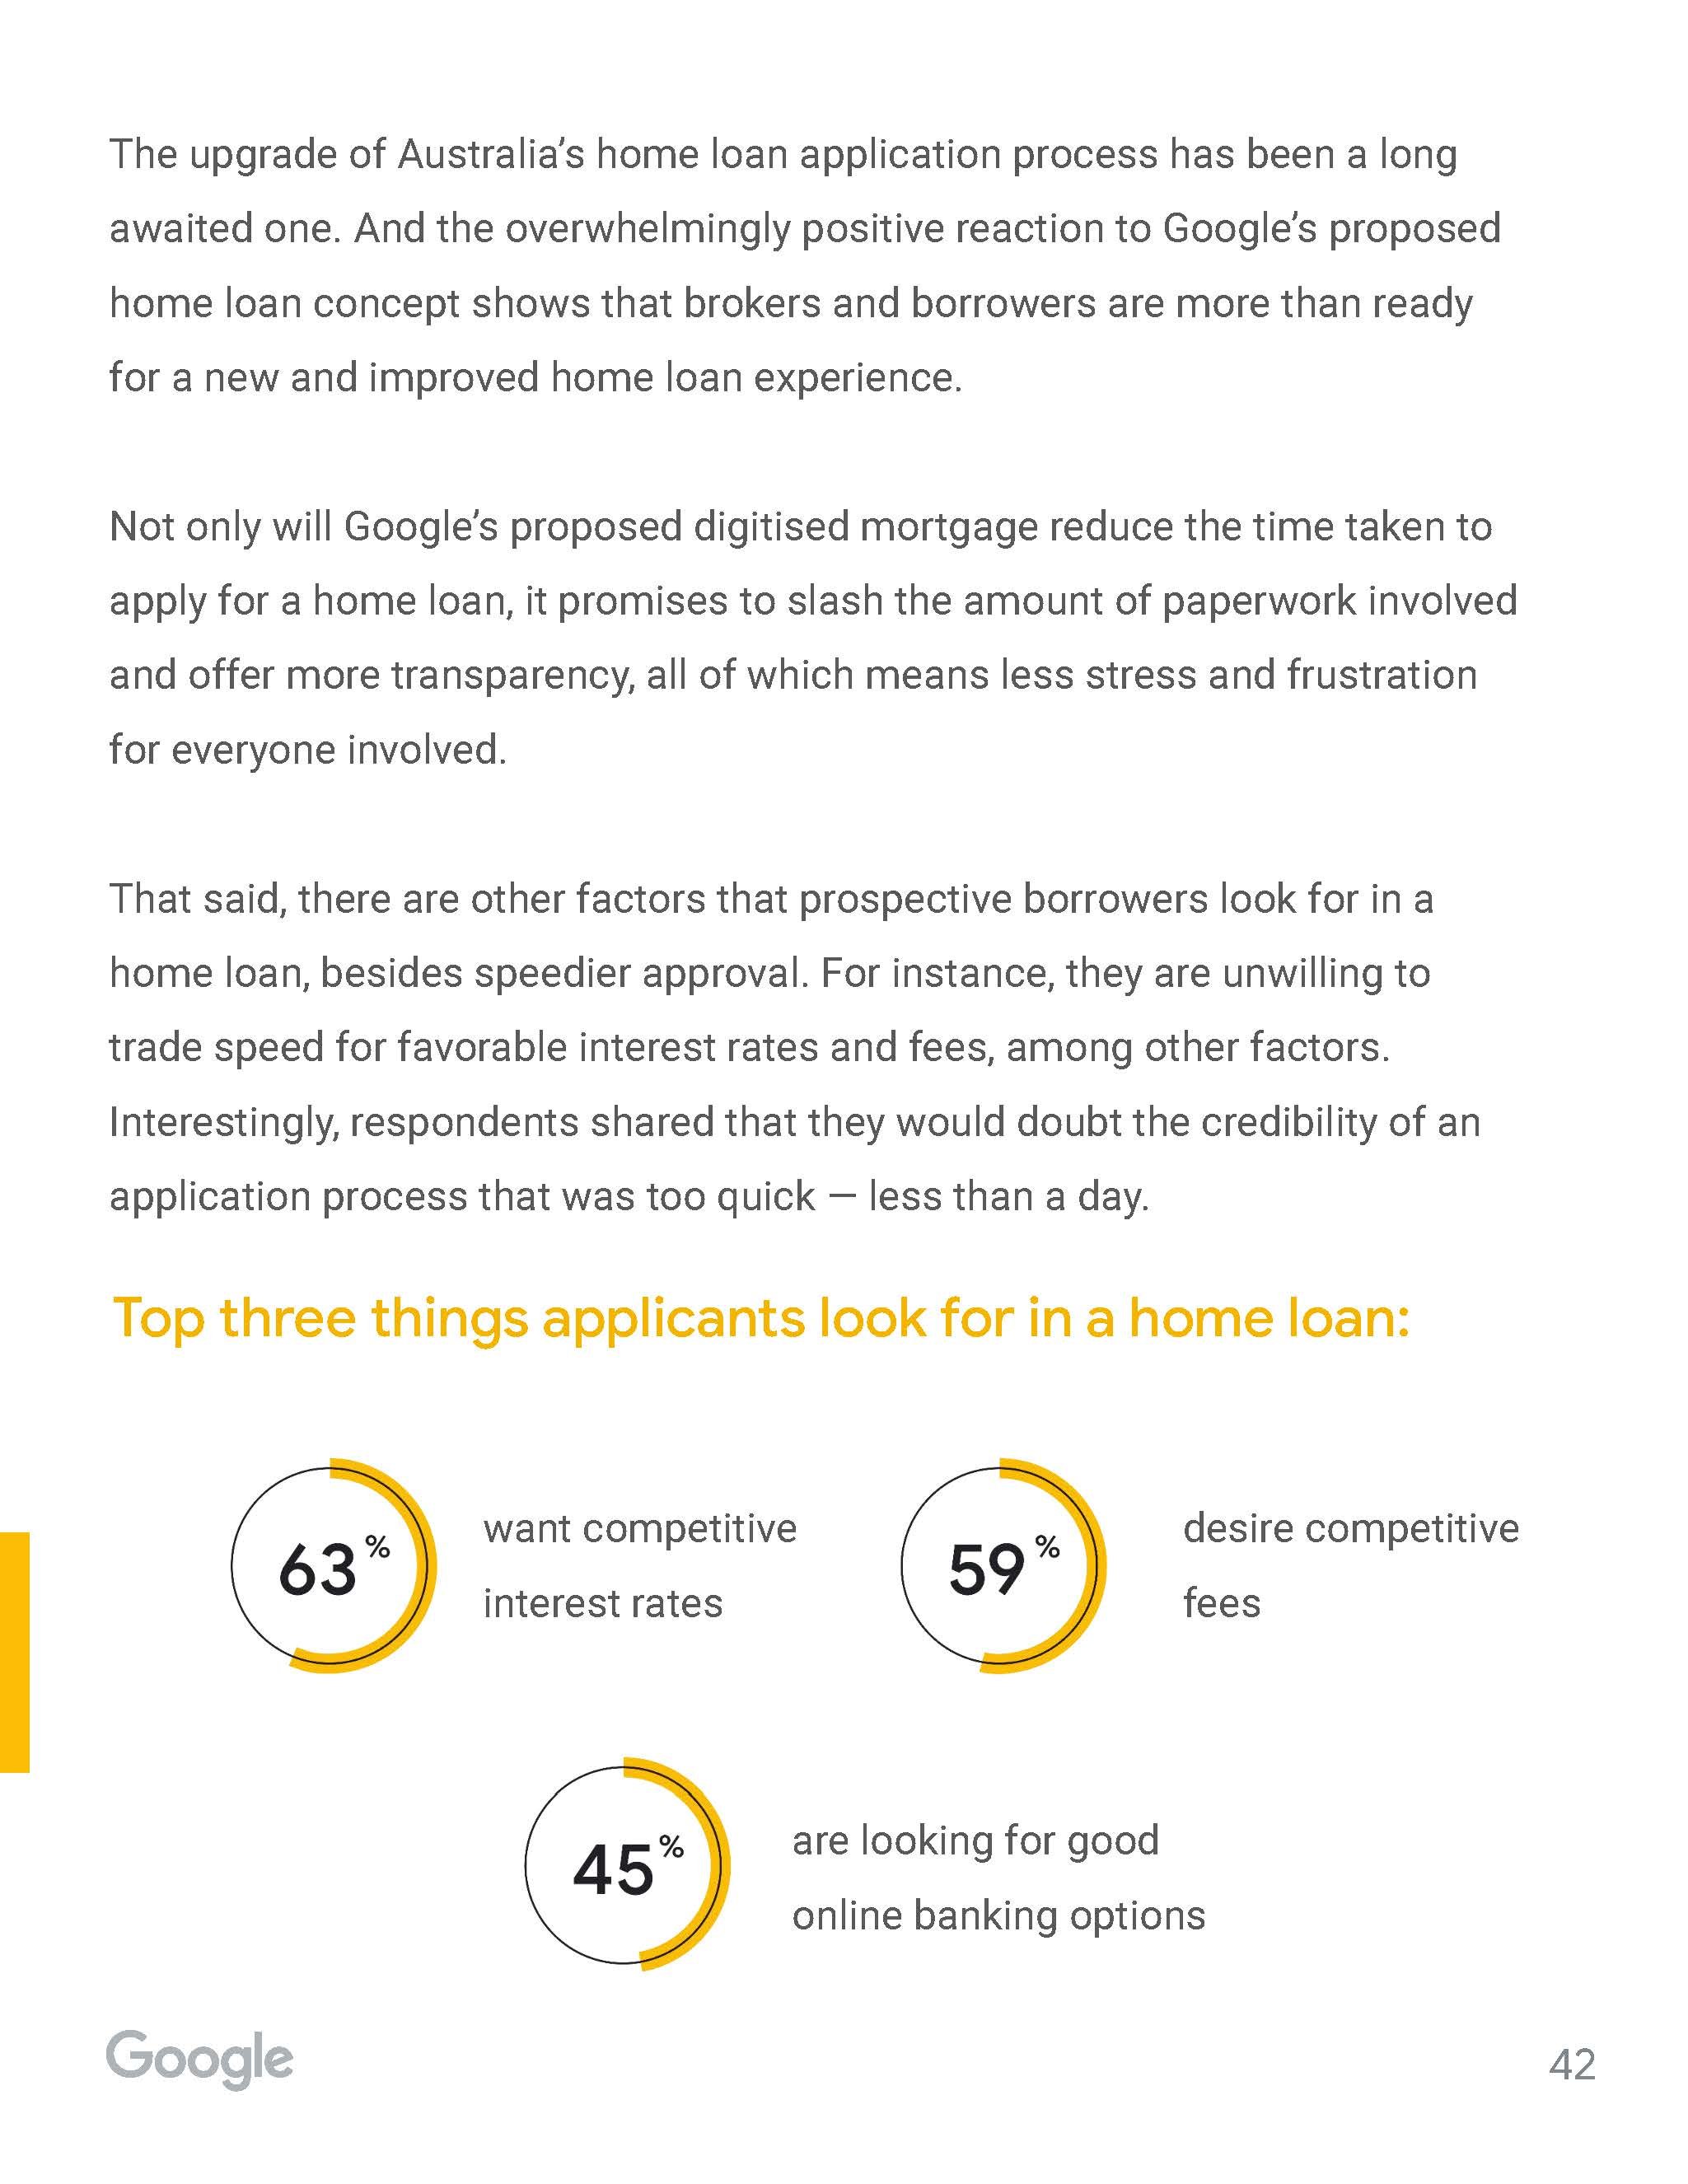 from_weeks_to_days_building_a_faster_home_loan_journey_for_aussies_en_Page_42.jpg